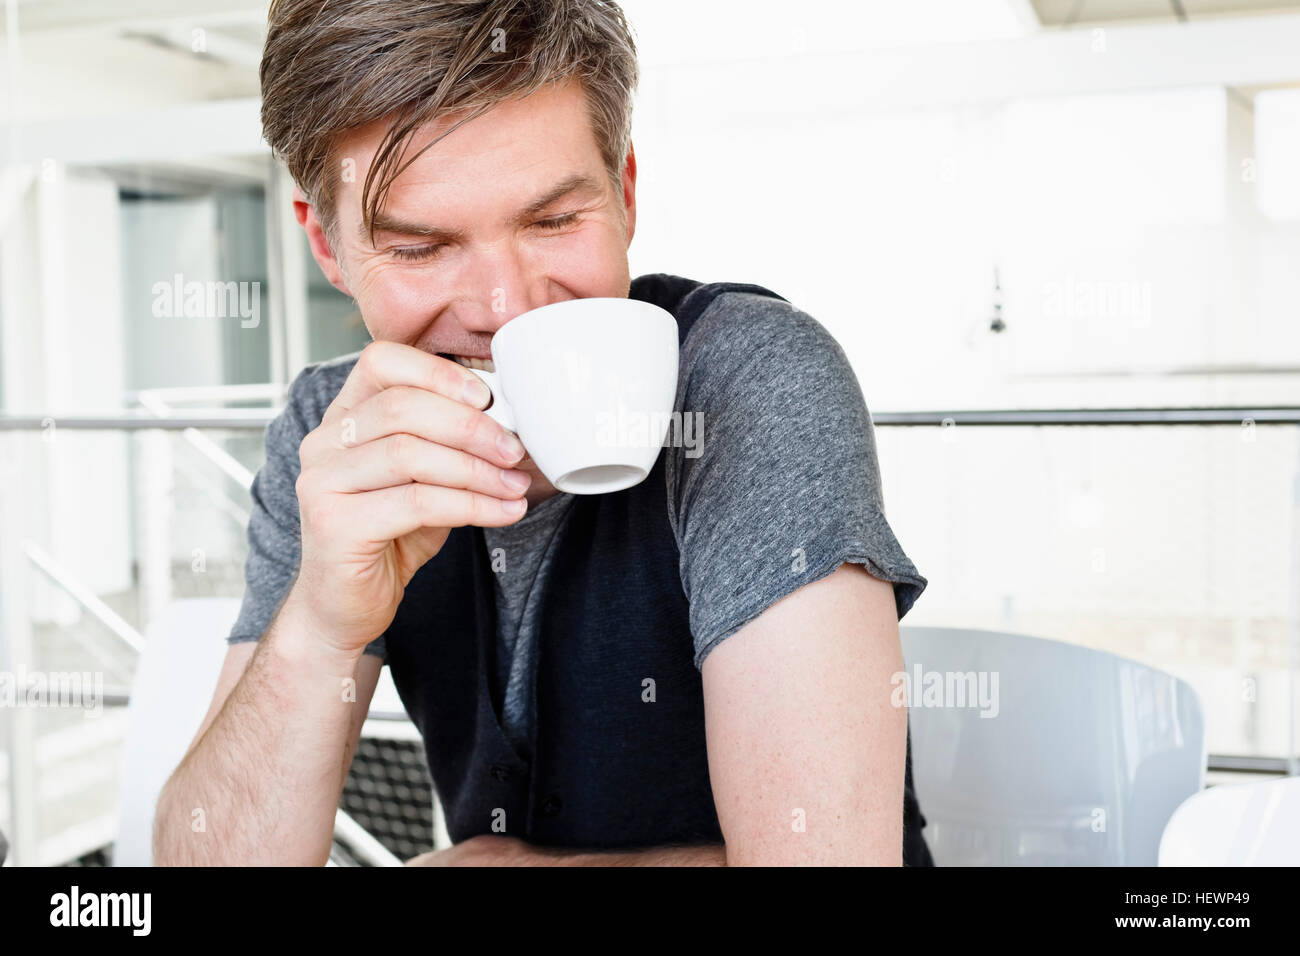 Man holding tea cup looking down smiling Stock Photo